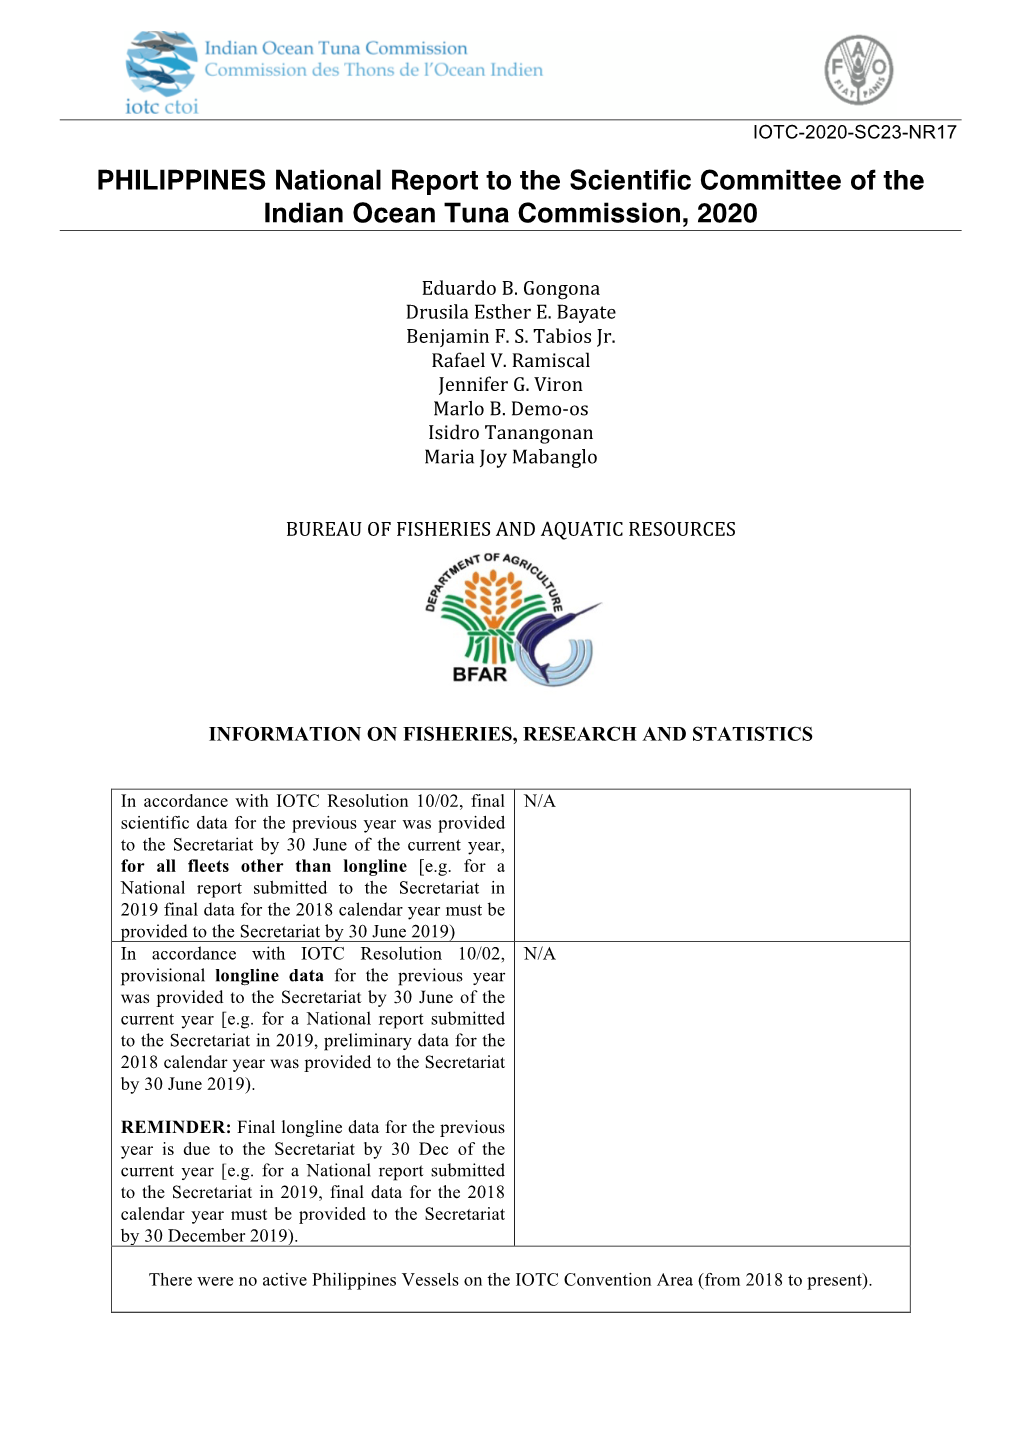 PHILIPPINES National Report to the Scientific Committee of the Indian Ocean Tuna Commission, 2020